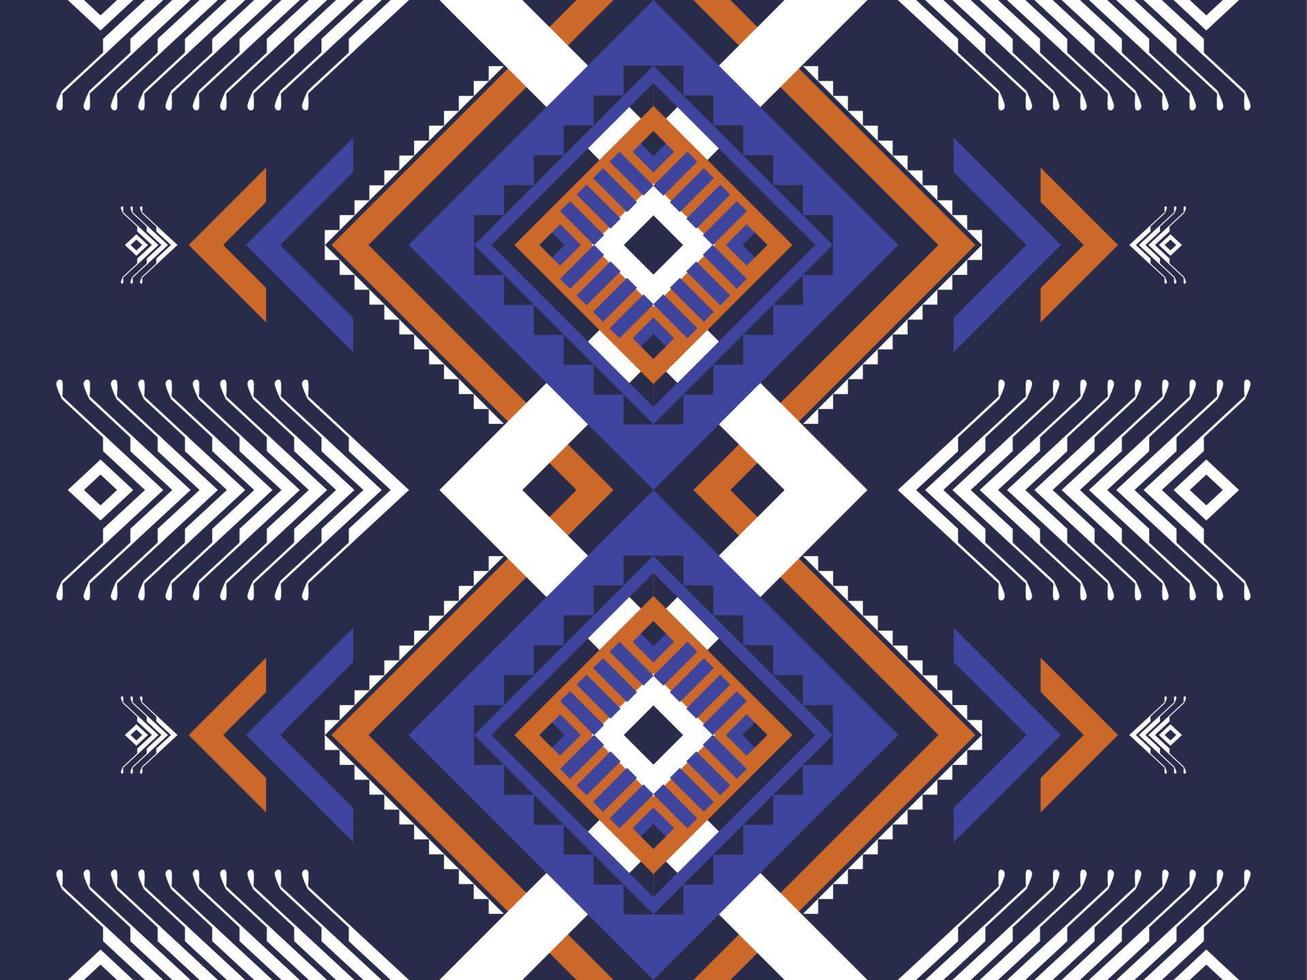 Geometric ethnic seamless pattern. Tribal striped style. Design for background, vector illustration, fabric, clothing, batik, carpet, embroidery.